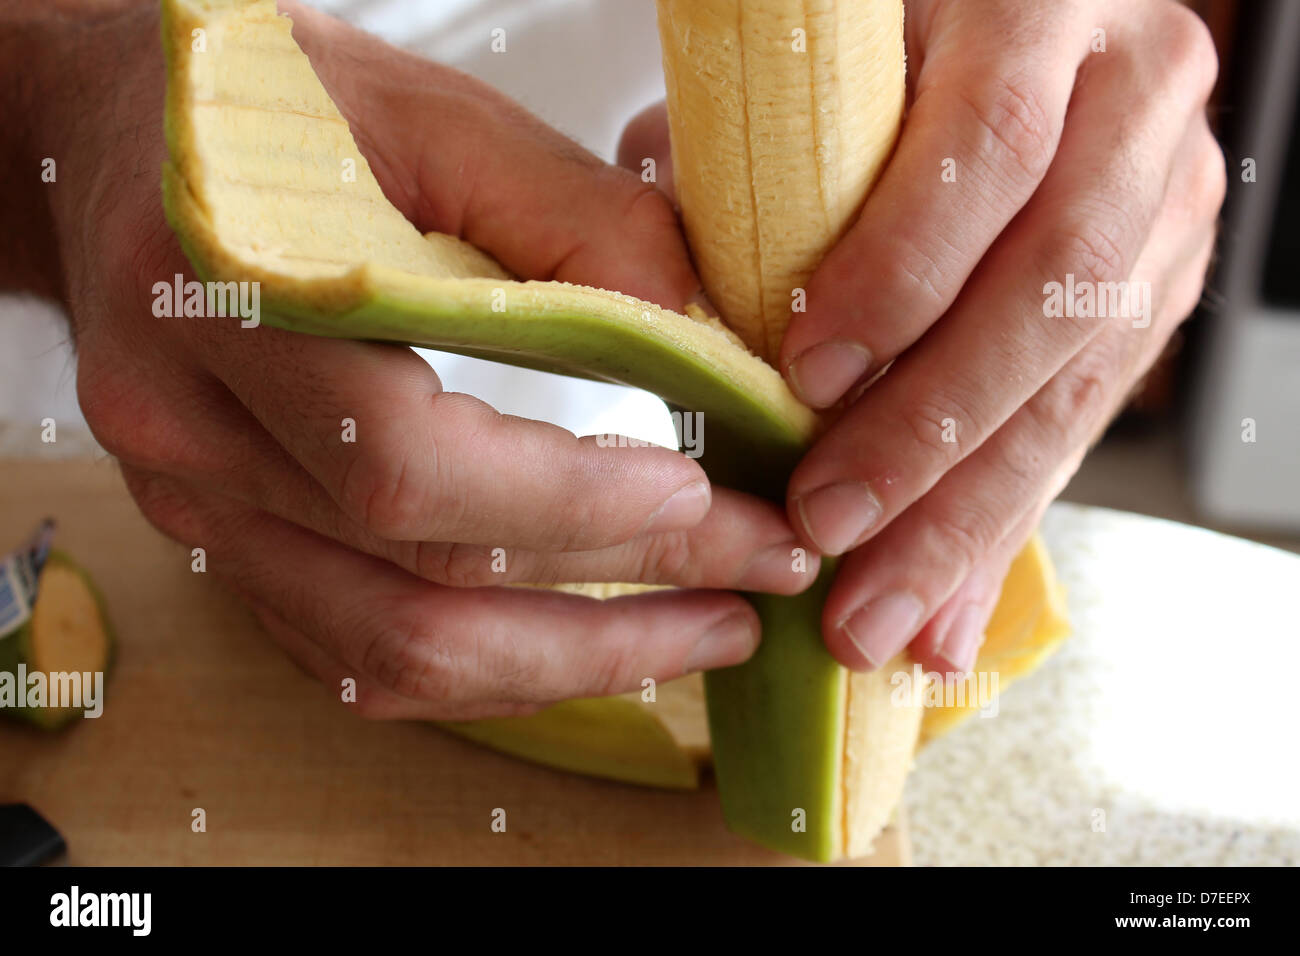 Man's hands carefully peeling back the thick skin of plantain fruit to ready for frying in virgin oil and light seasonings. Stock Photo